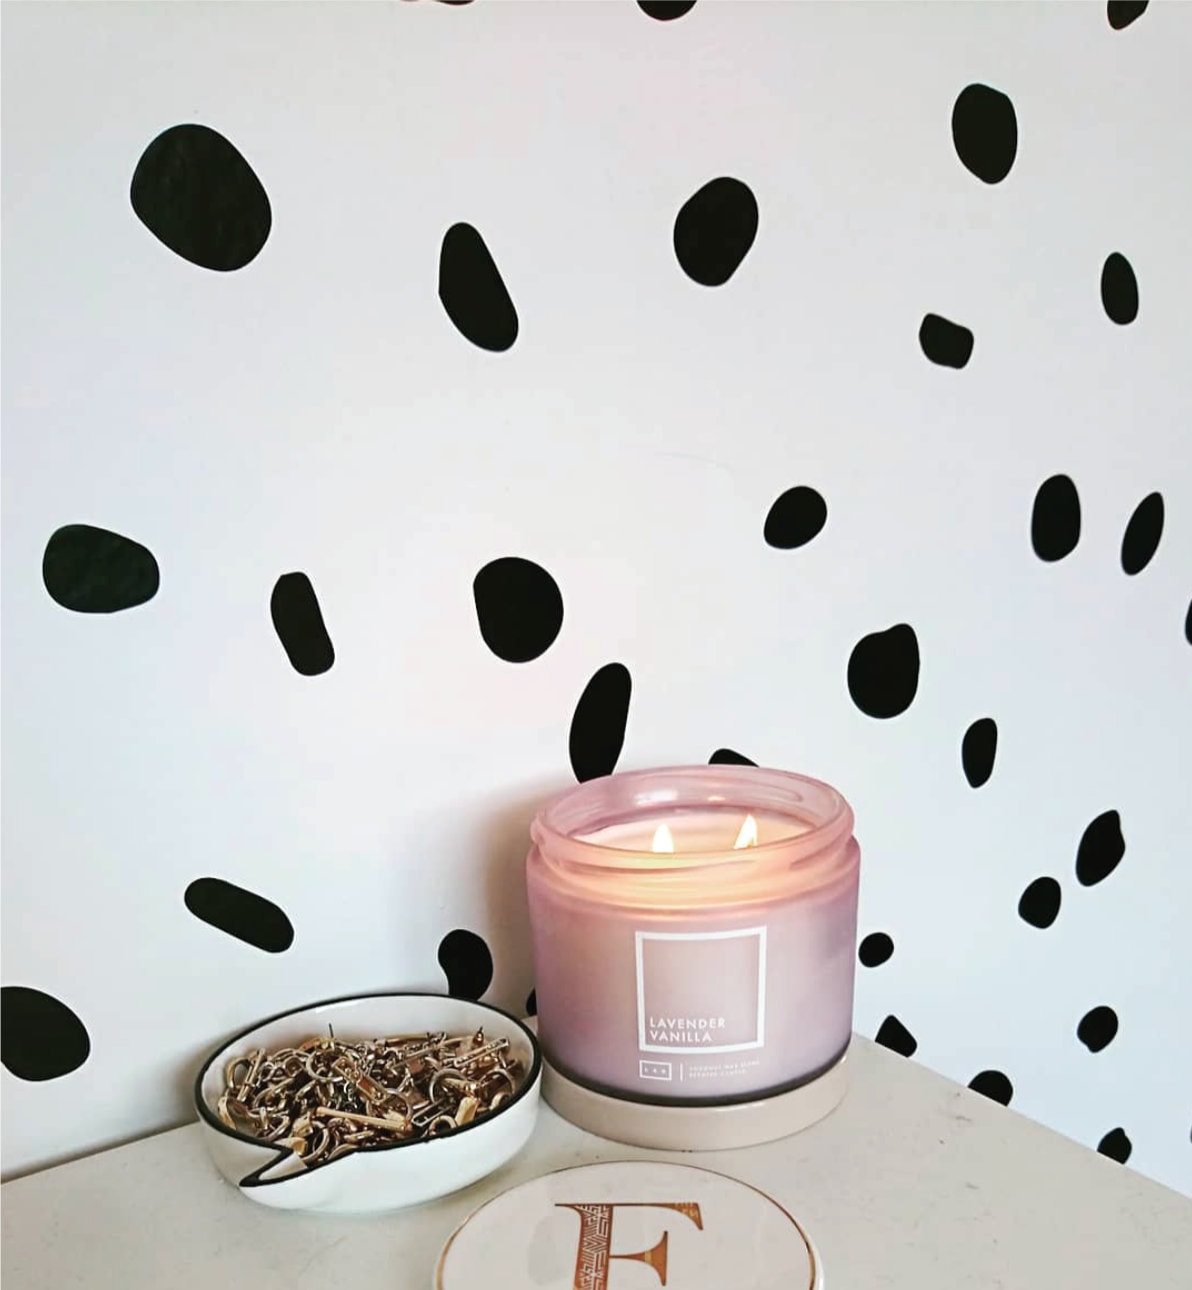 560 Animal Spits Wall Stickers Polka Dot Wall Sticker Decals Home Decor Removable